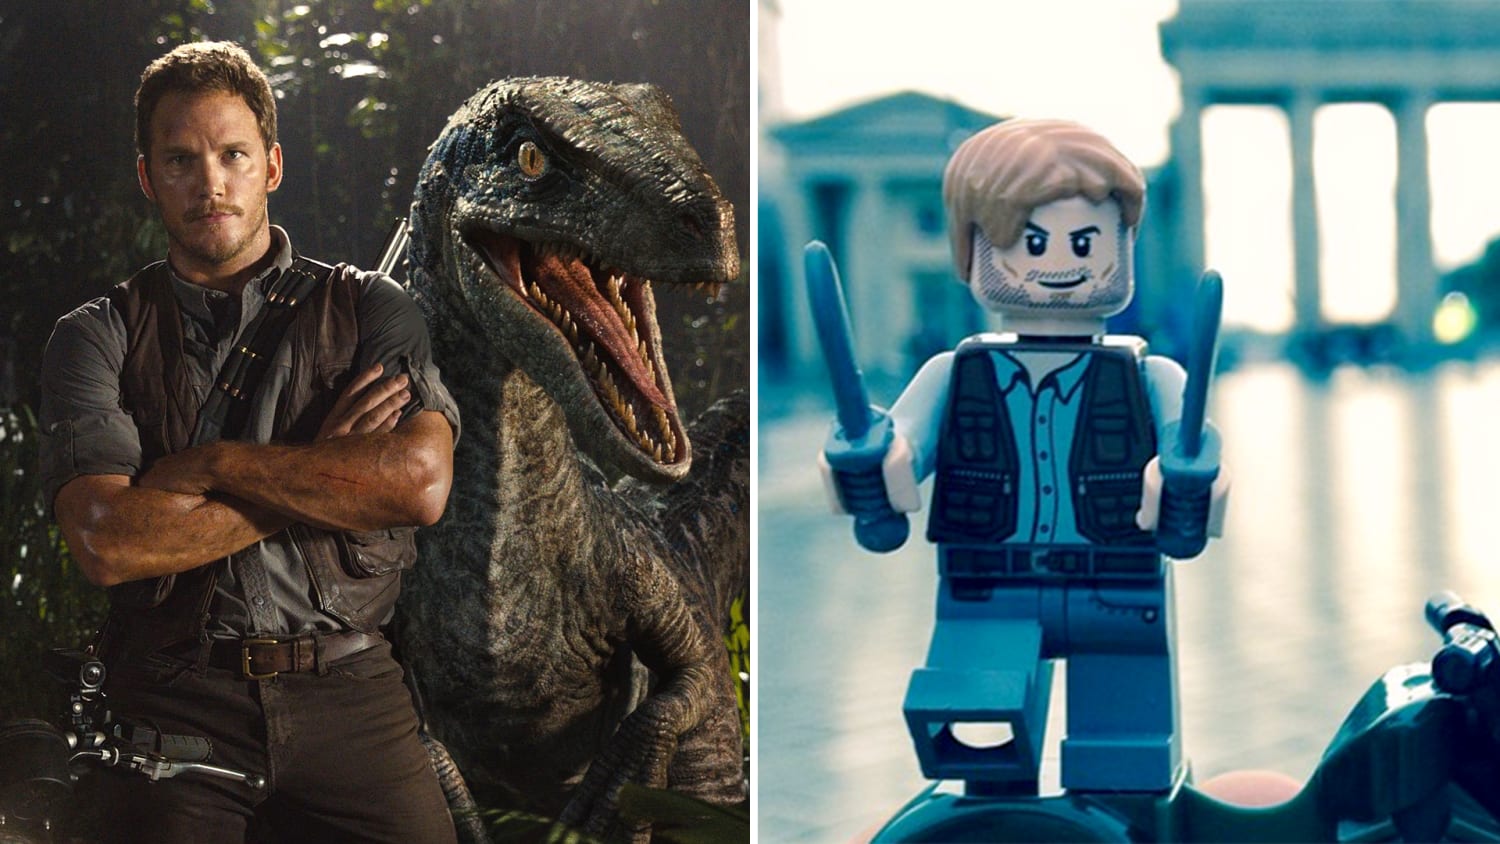 Pratt is celebrating two of his biggest roles by bringing Lego Owen along w...